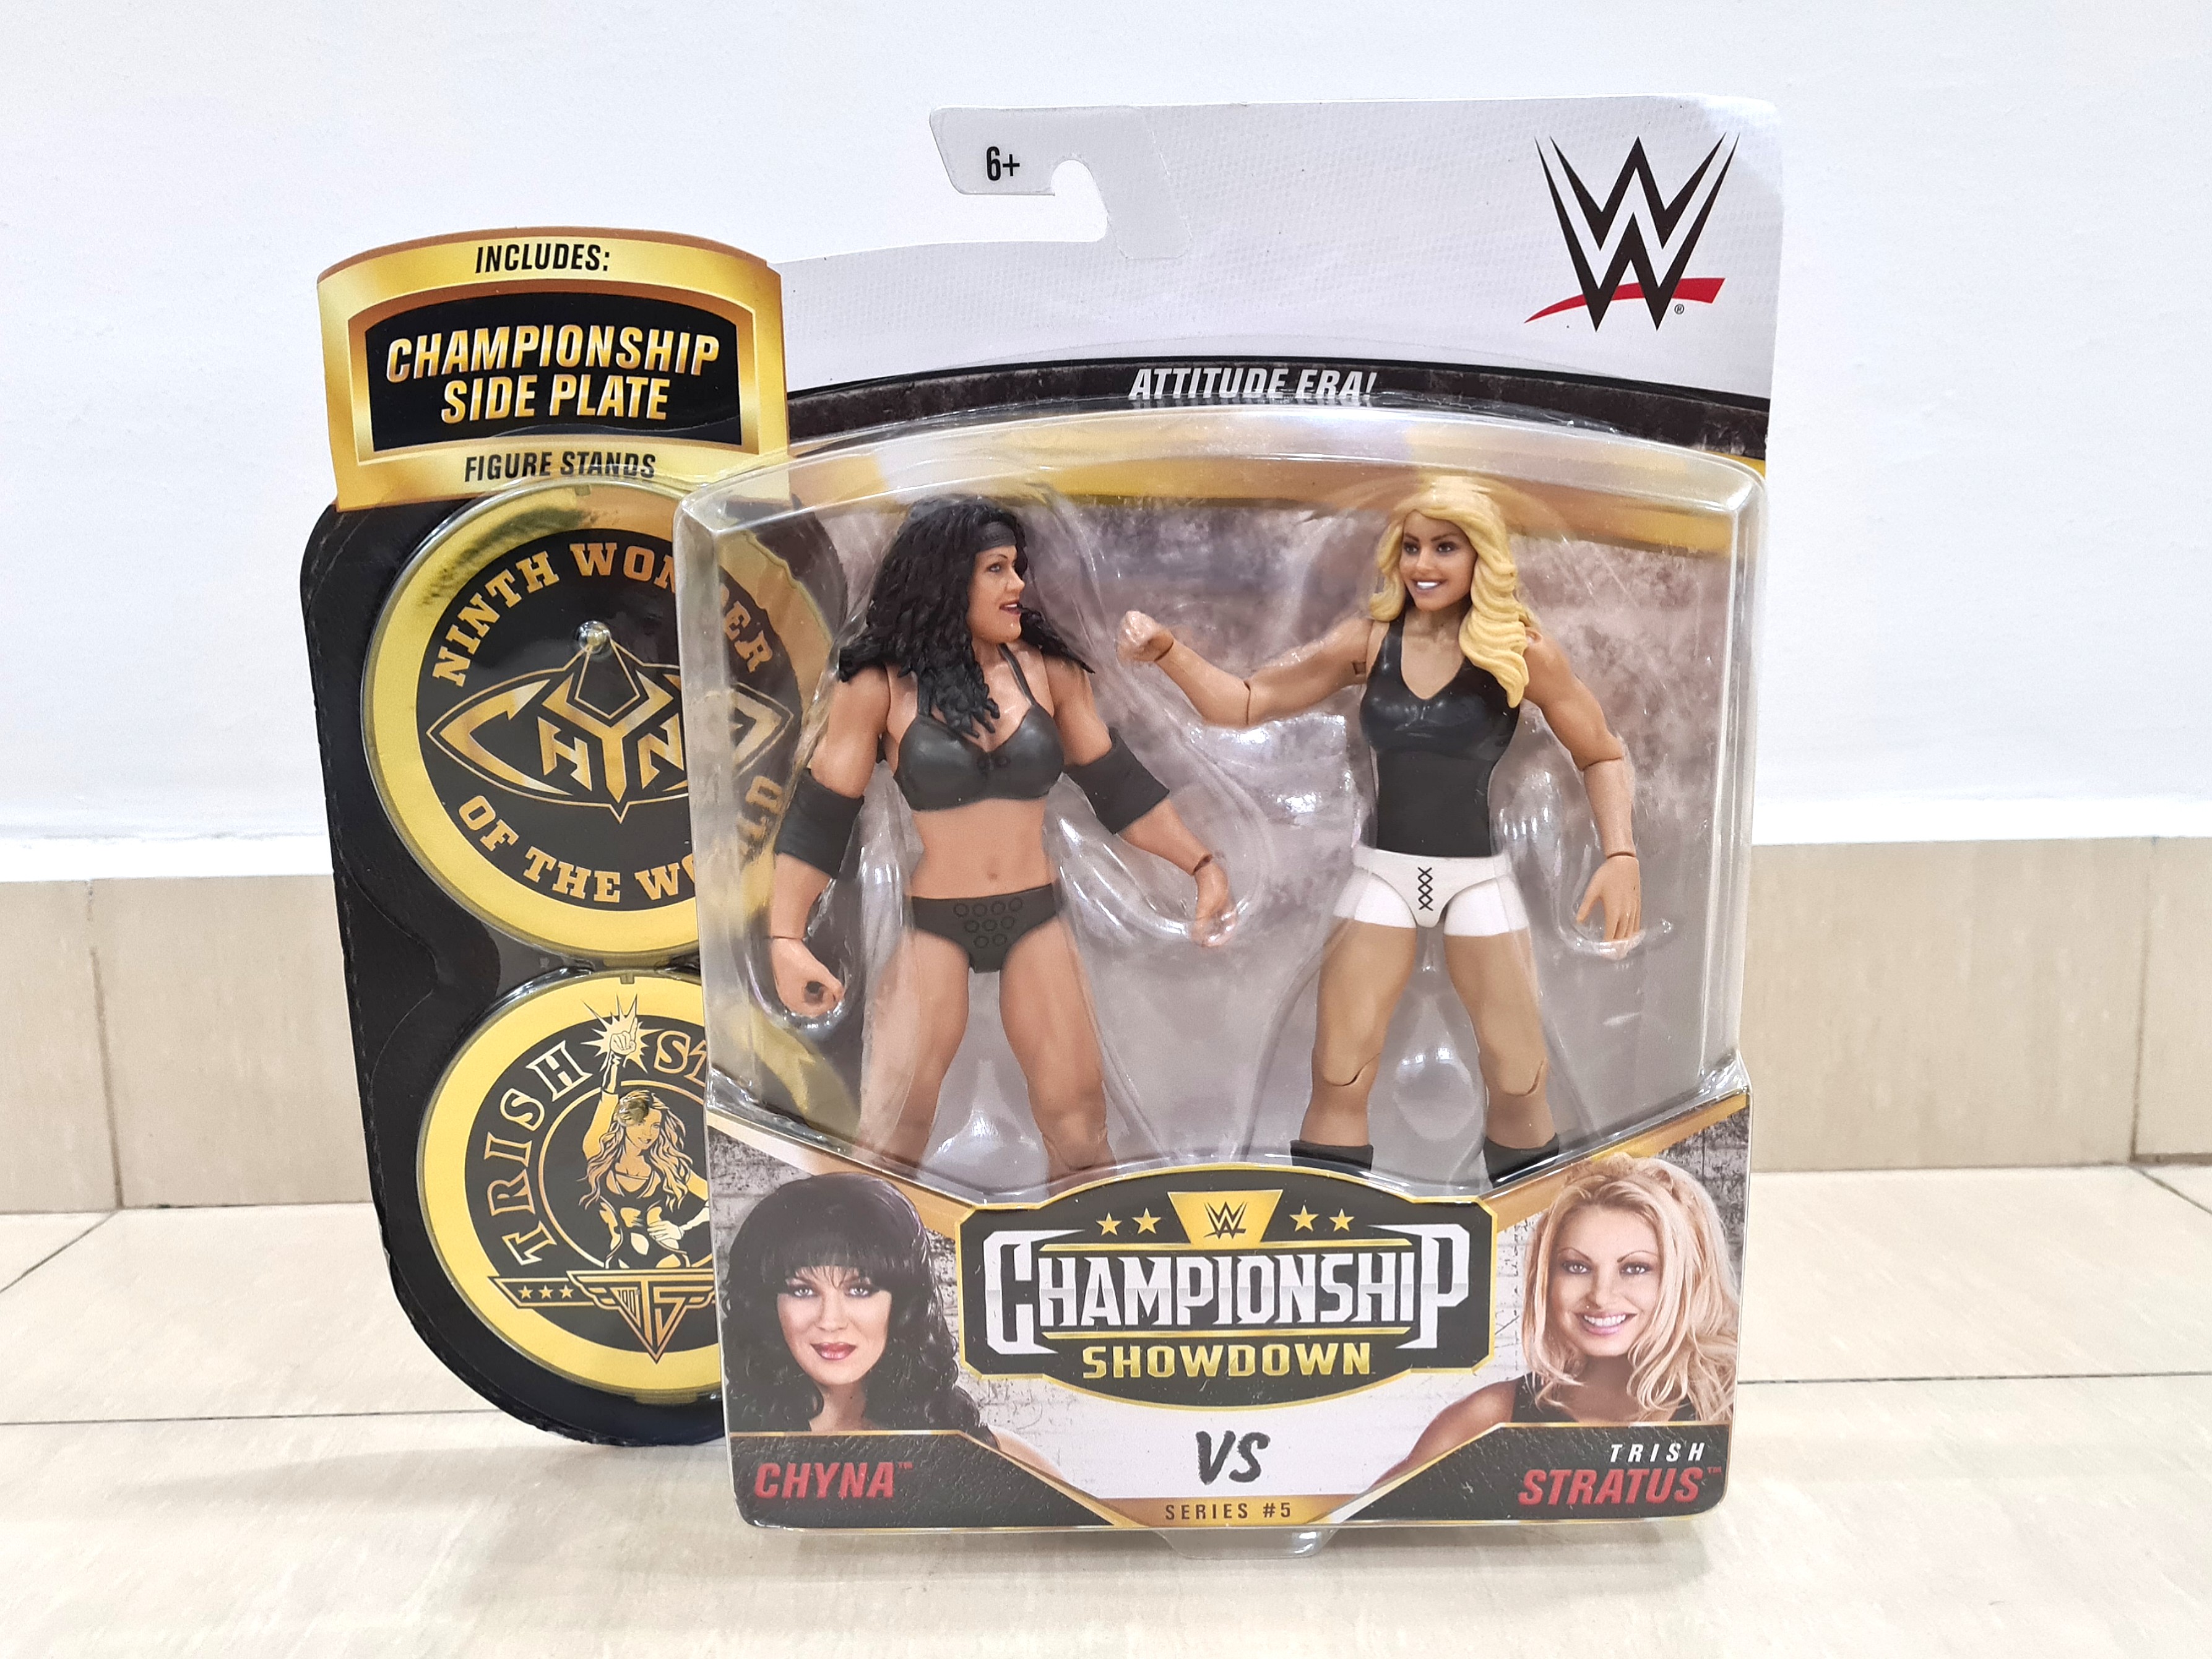 Reserved Wwe Championship Showdown Series 5 Chyna Trish Stratus Hobbies Toys Toys Games On Carousell